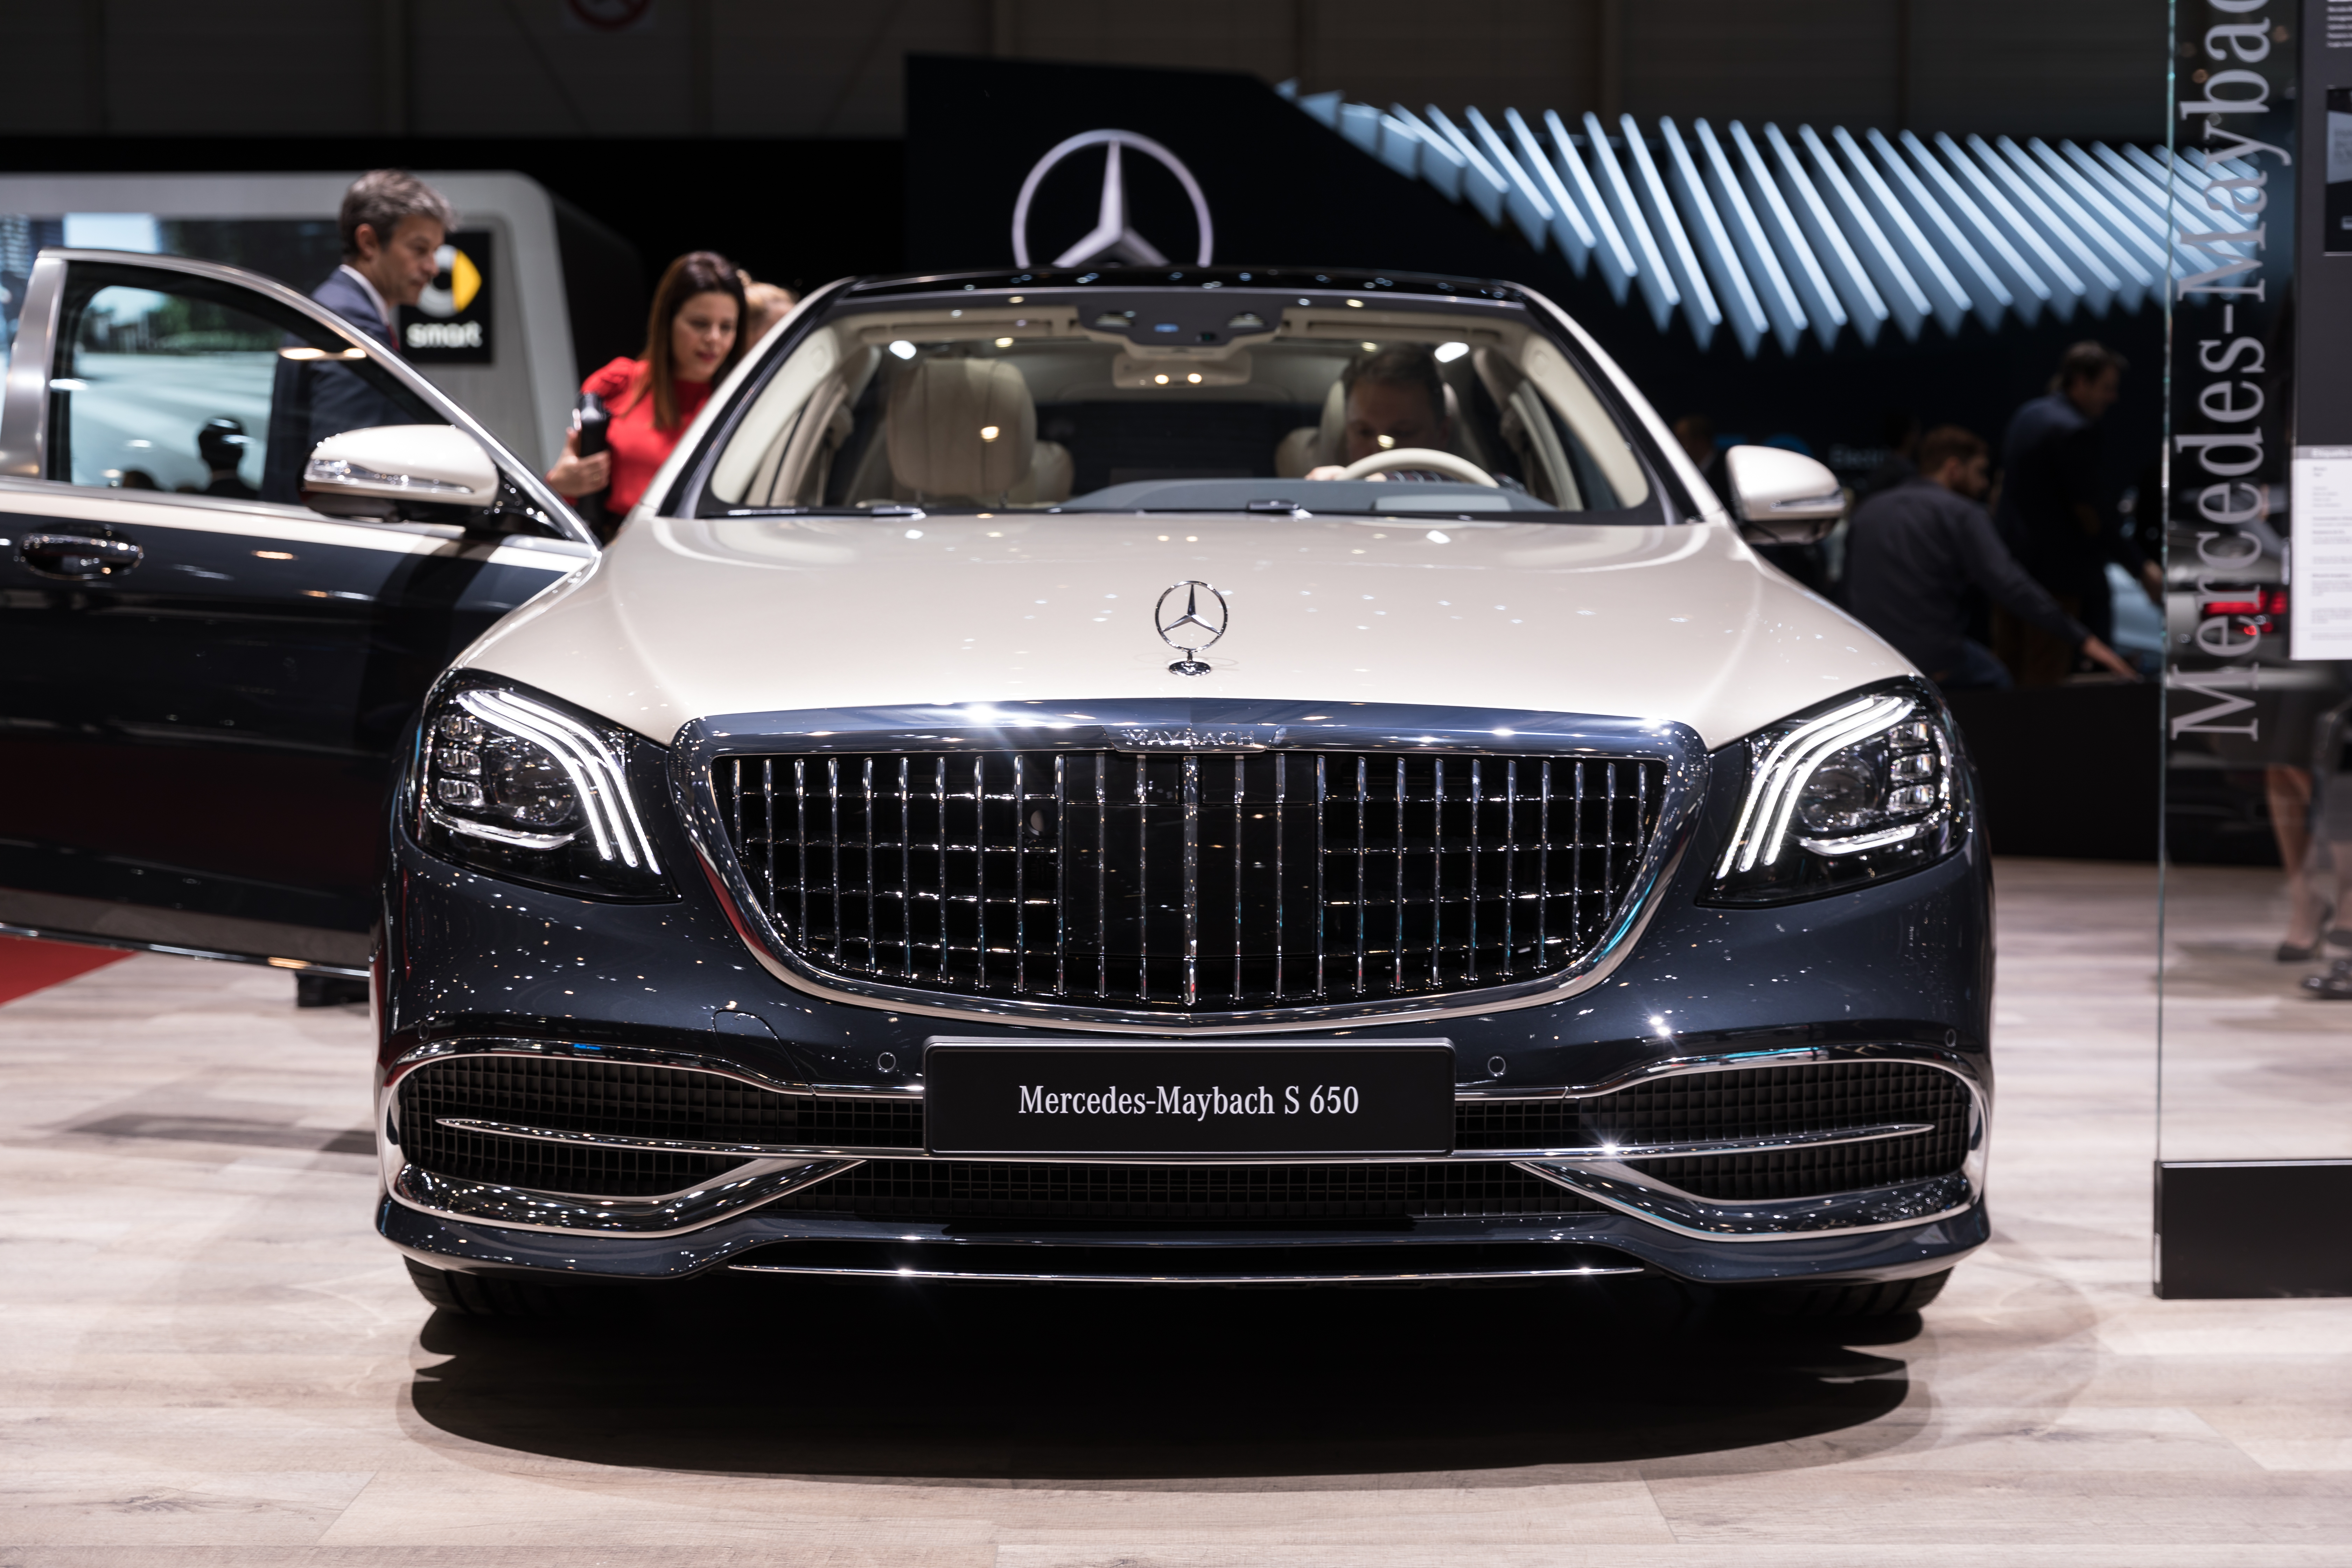 2. Delving into the Intricacies: Why Luxury Car Maintenance Can Break the Bank